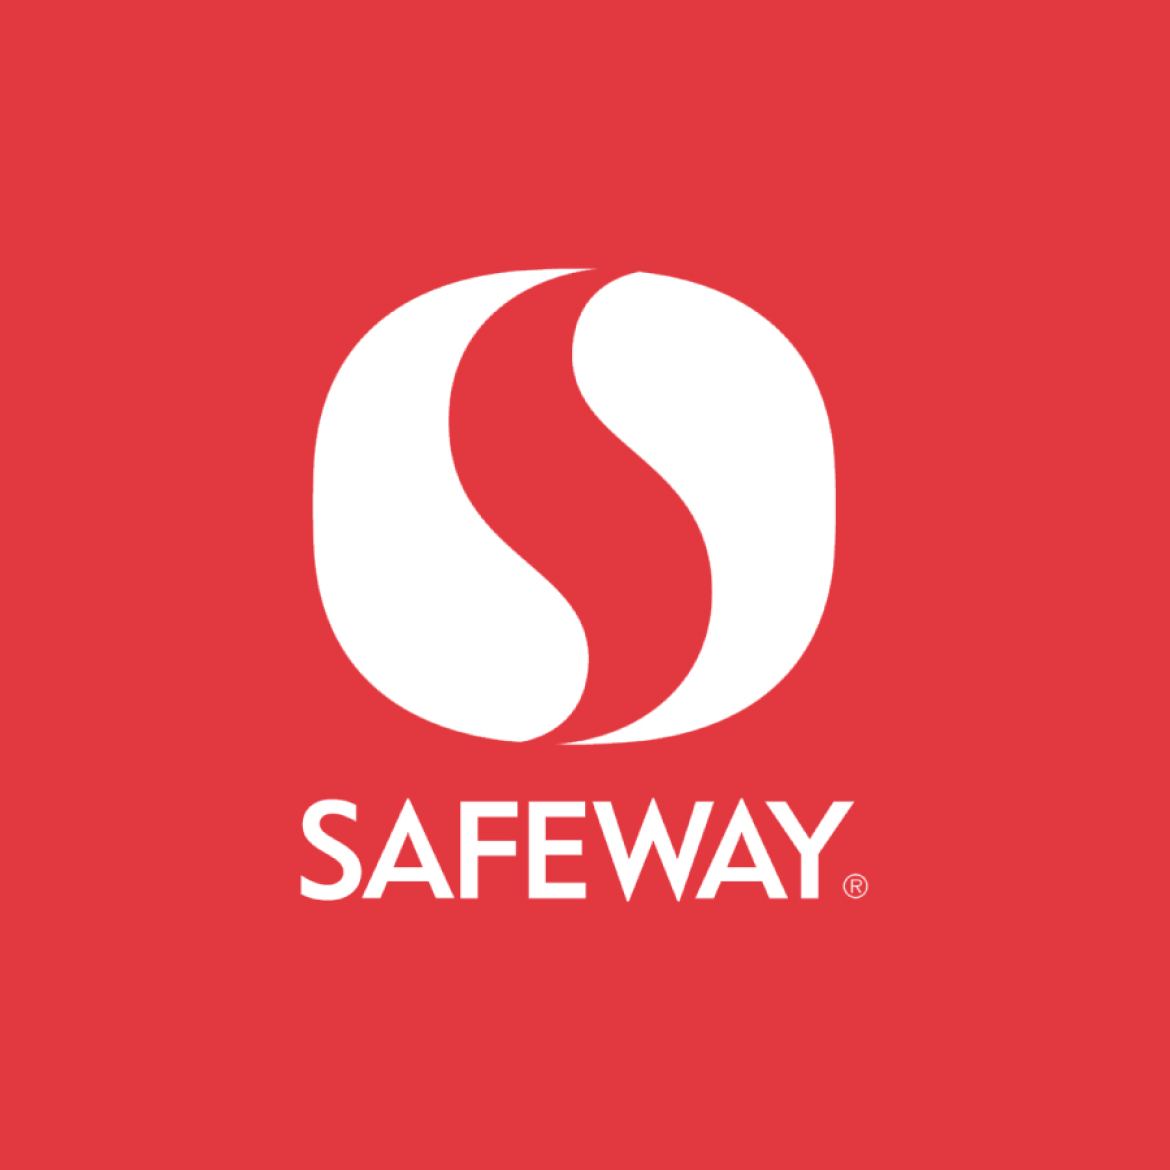 Safeway - Consumer Products